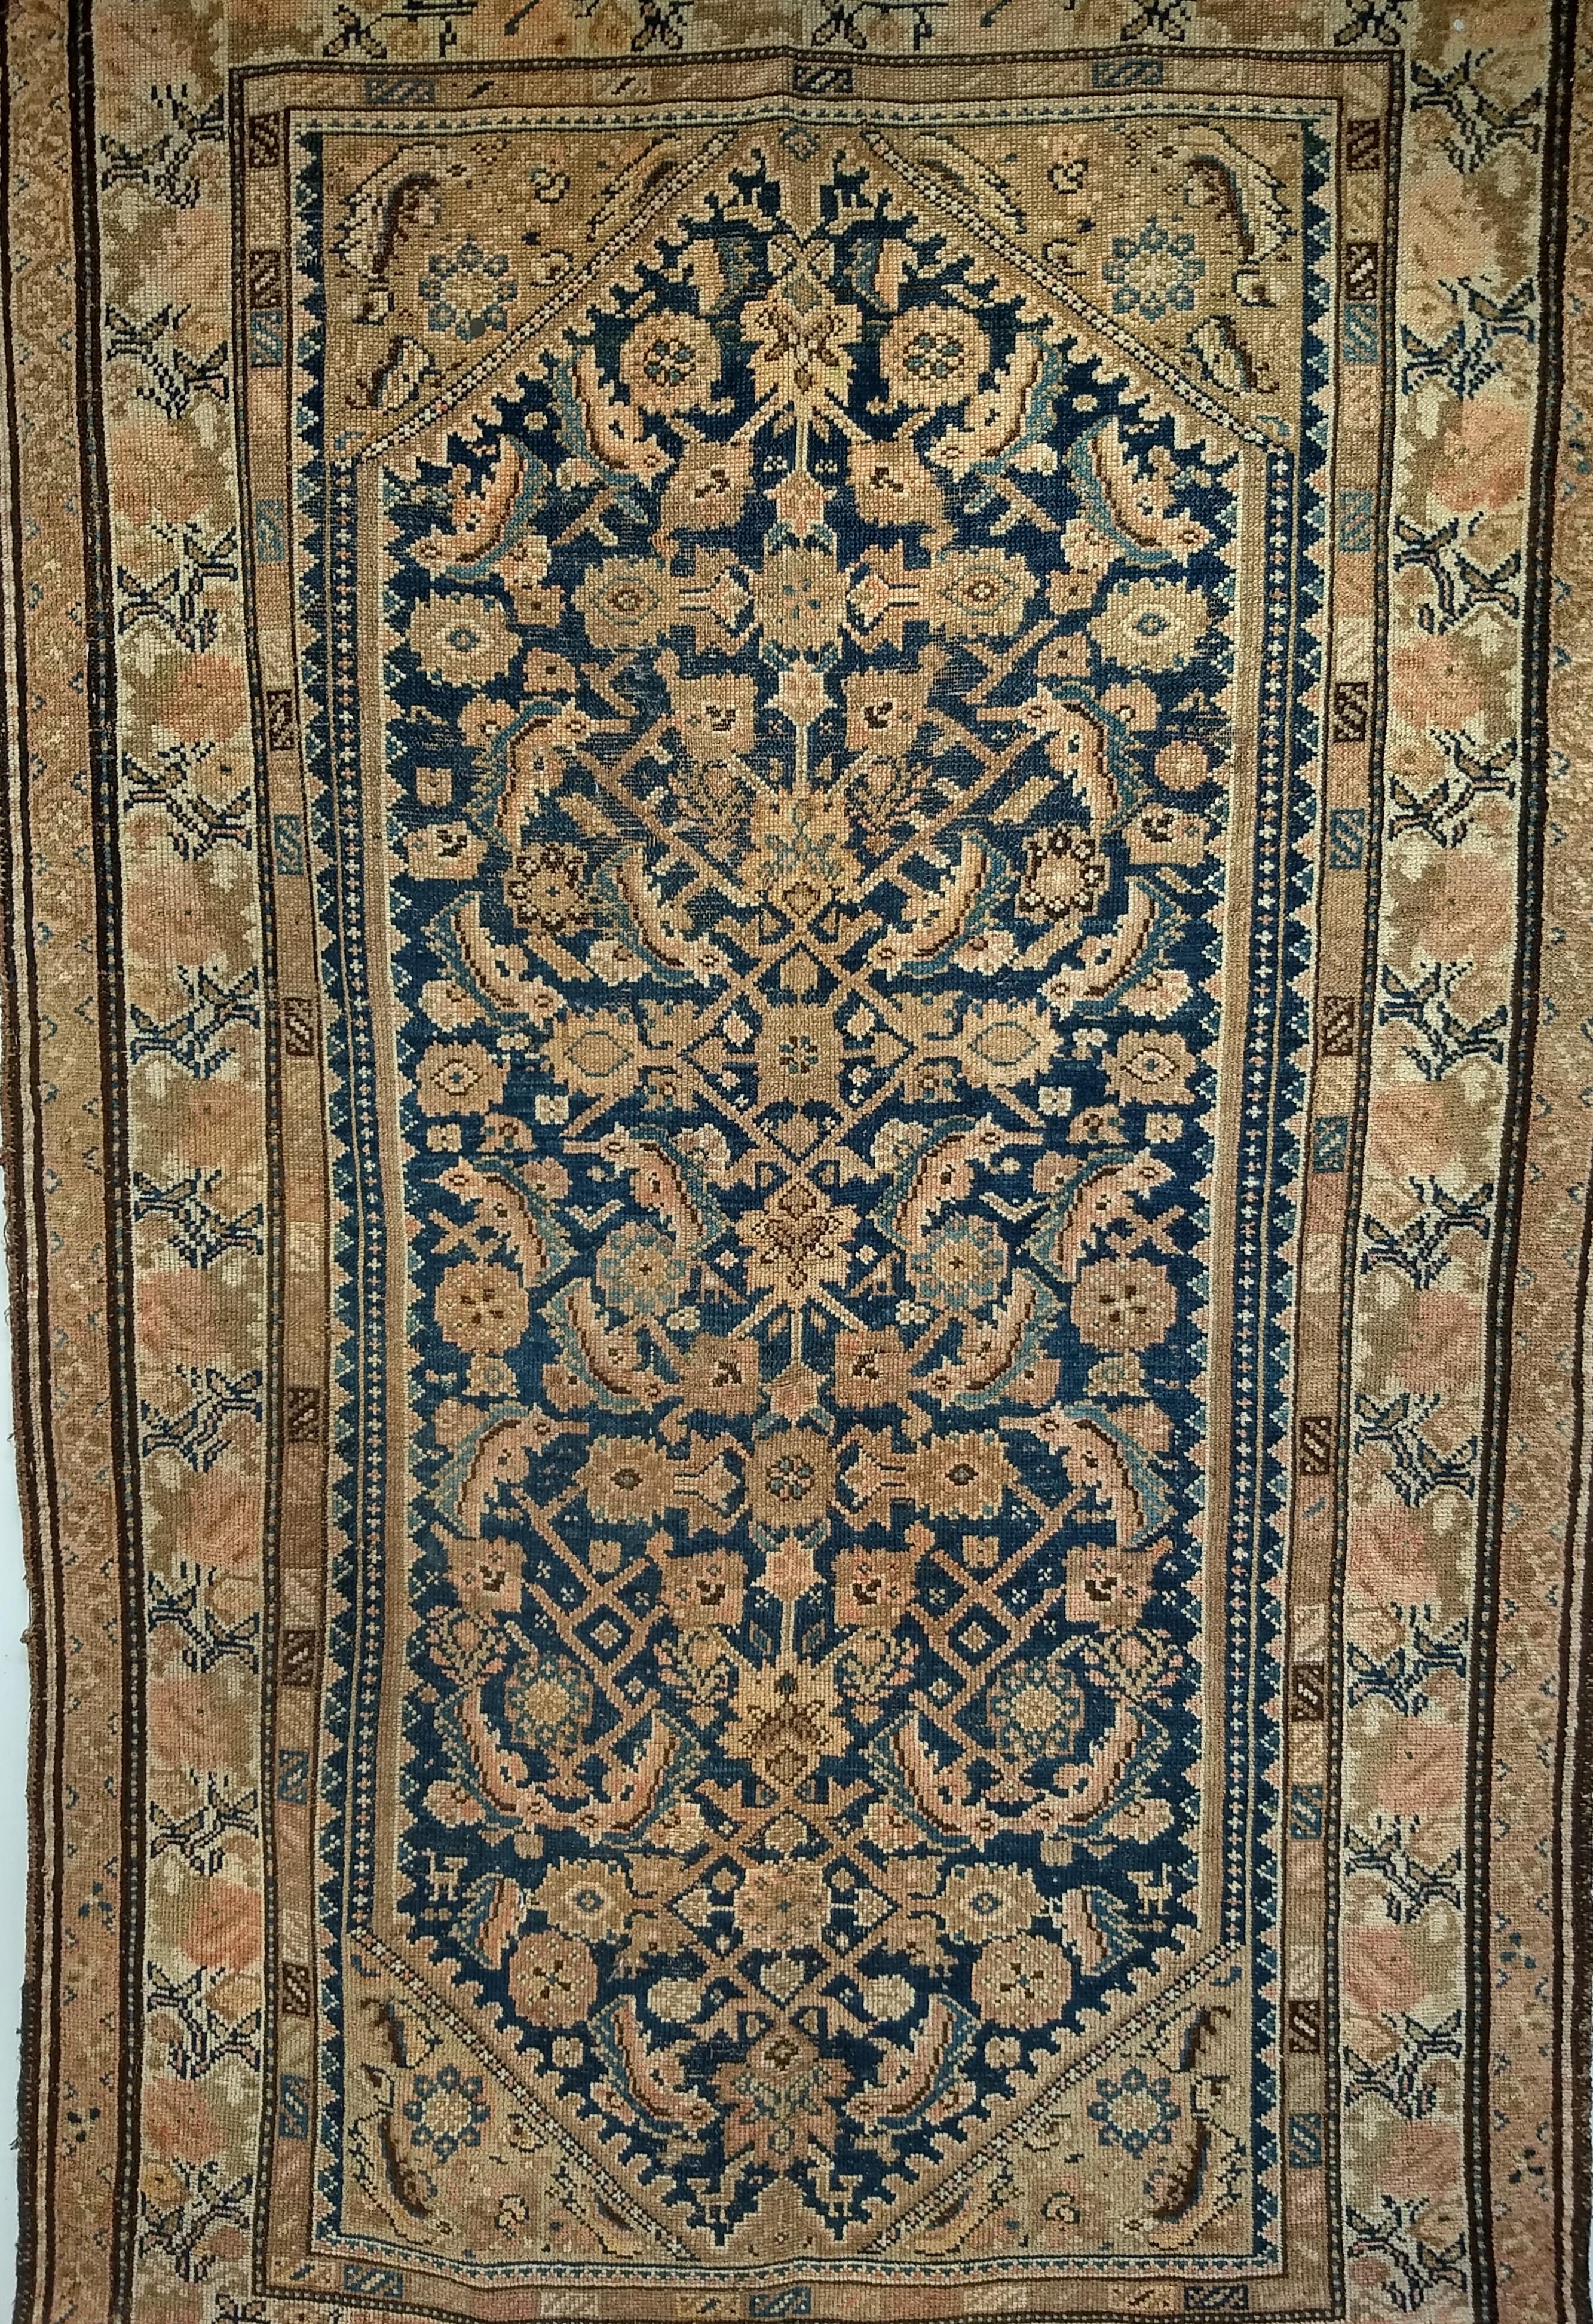 Vintage Persian Malayer in an allover Herati design area rug from the late 19th century.  The Malayer rug has an allover Herati pattern design on a dark navy blue field and a cream color border with design colors in brown and French blue. The